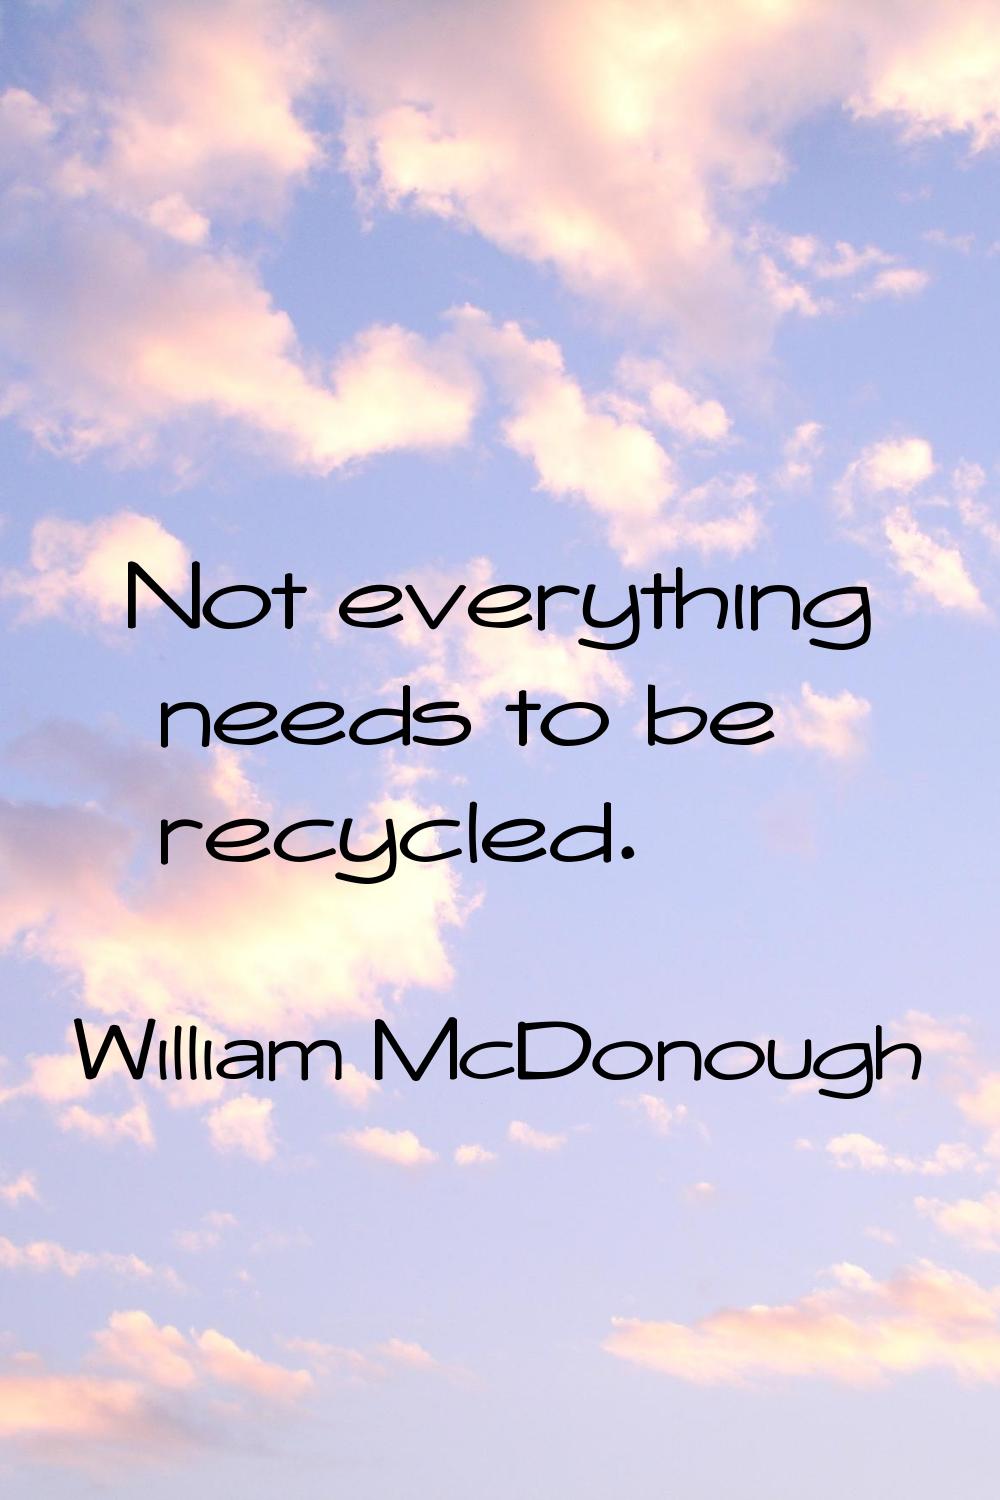 Not everything needs to be recycled.